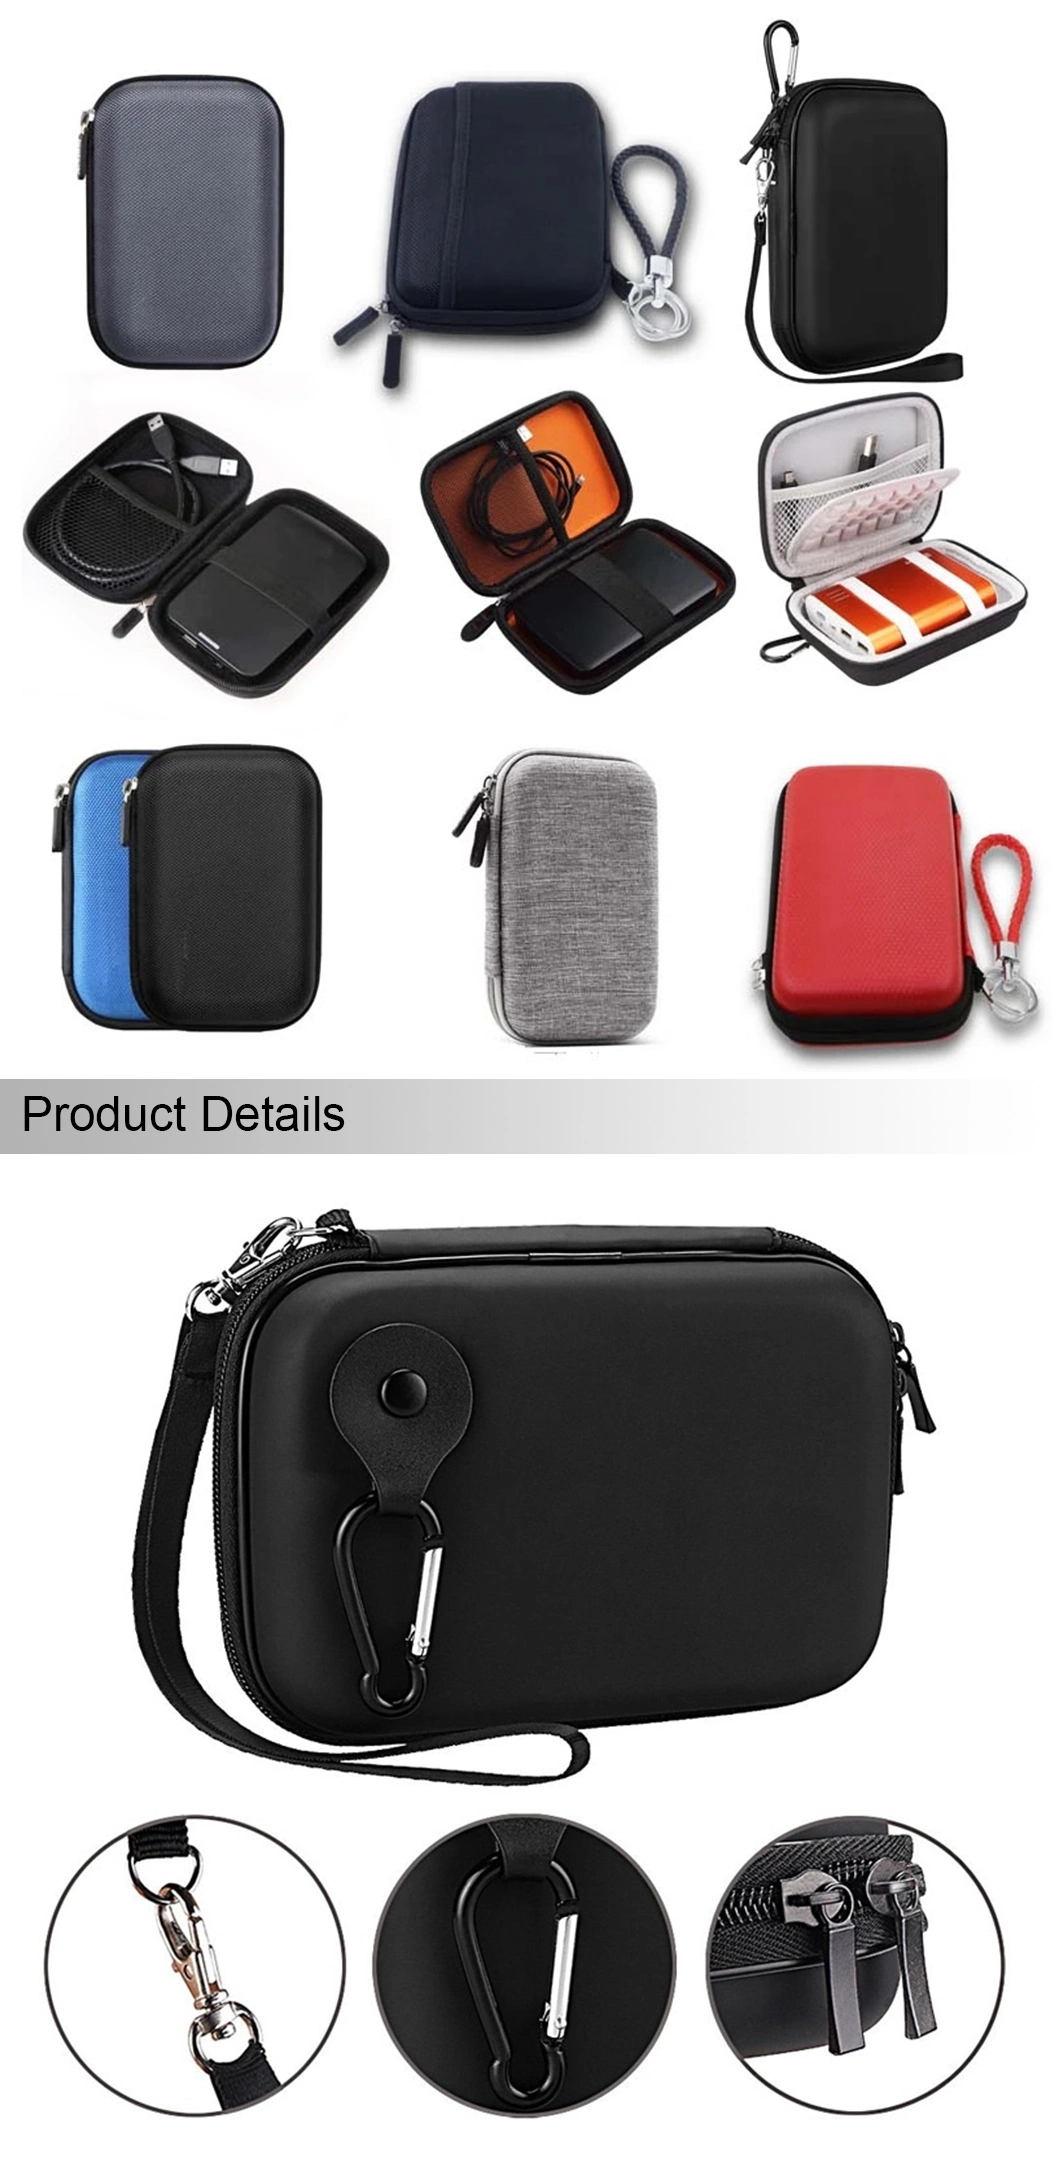 Power Bank Waterproof Case Compatible for Anker/Aukey Portable Battery Charger Carrying Bag Shockproof Packing Bag